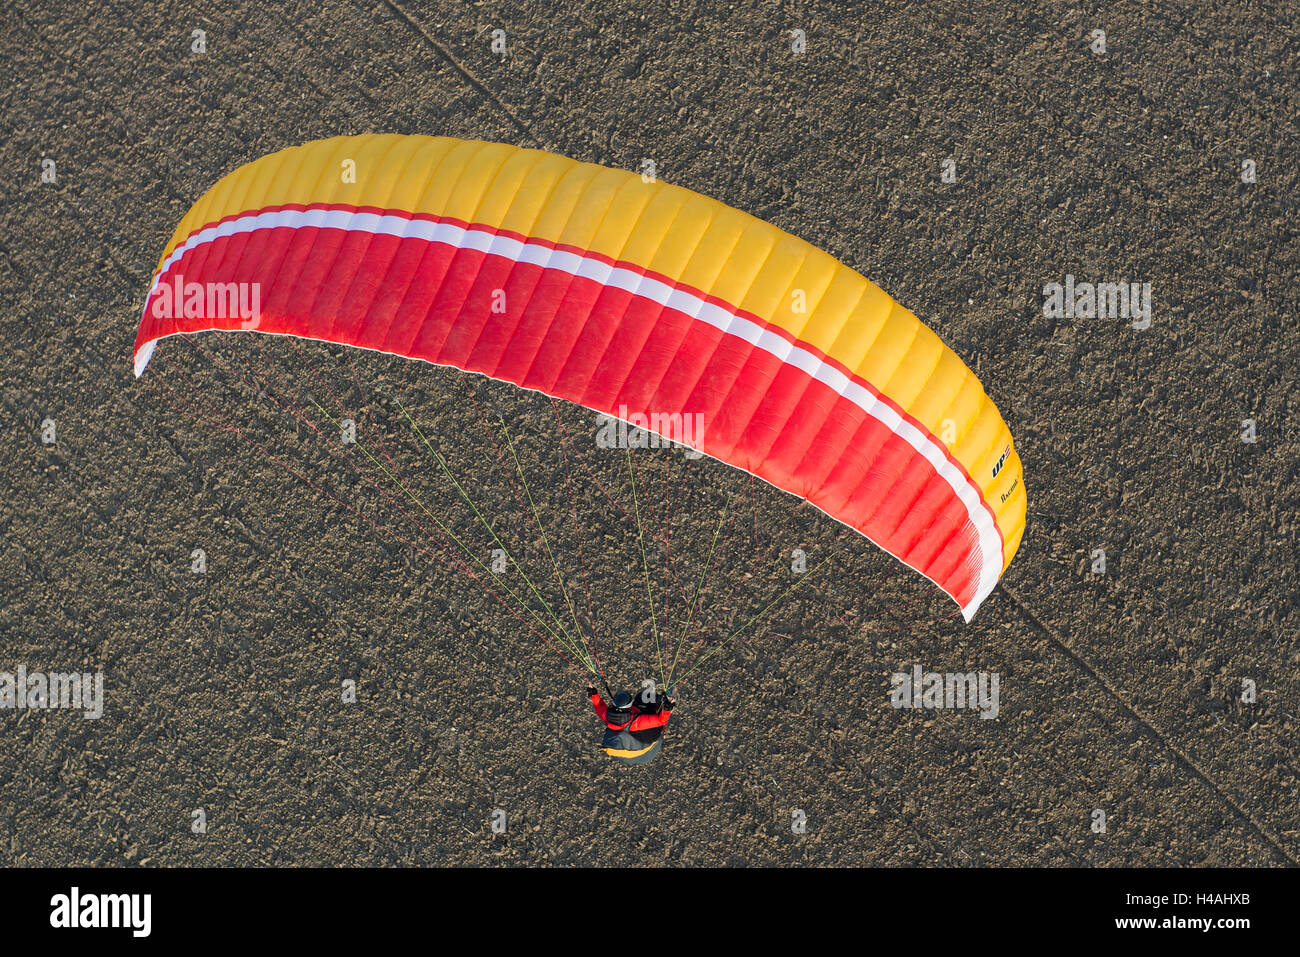 Paraglider, Paragliding, Andalusia, aviation, Algodonales, scenery, nature forms, aerial picture, aviation, province of Cadiz, Spain Stock Photo